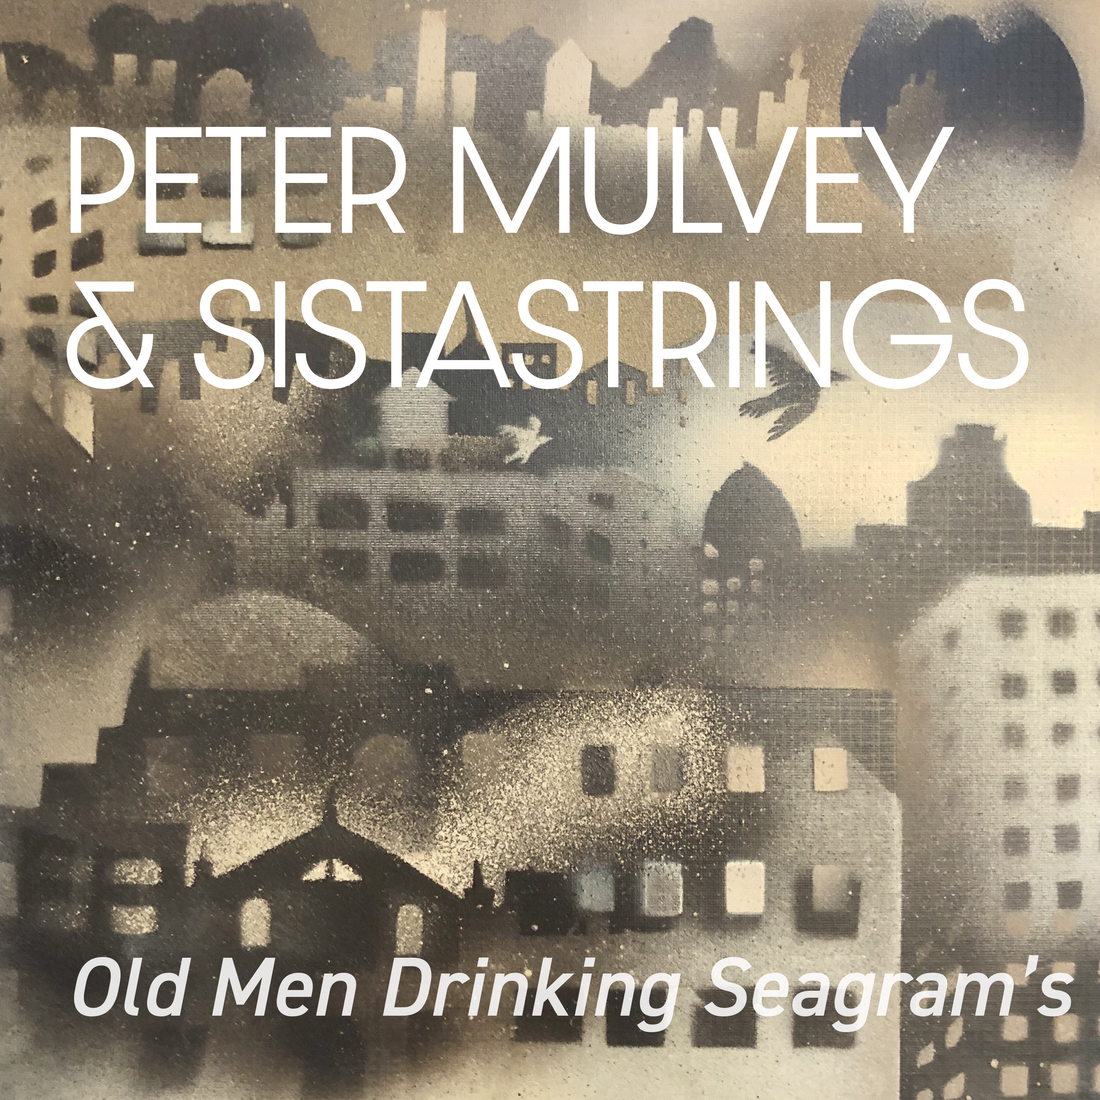 New Single from Peter Mulvey and SistaStrings: "Old Men Drinking Seagram's"